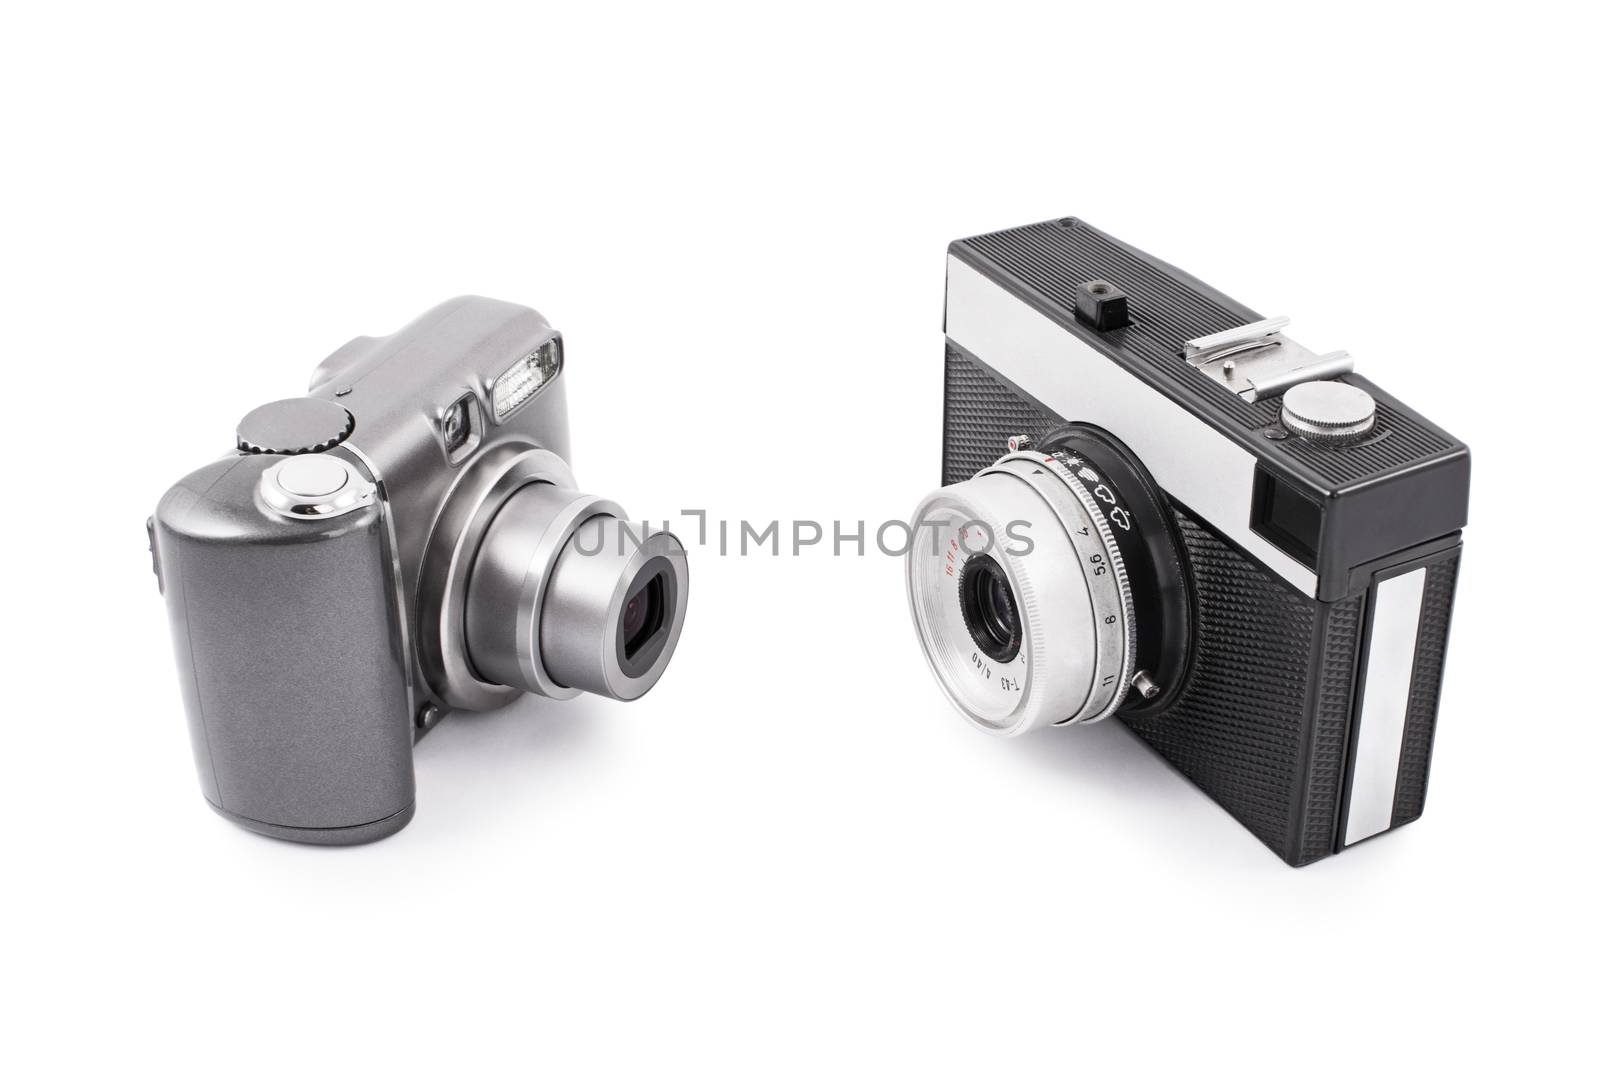 Out with the old, in with the new. Two cameras opposed to each other, old and new, isolated on white background.